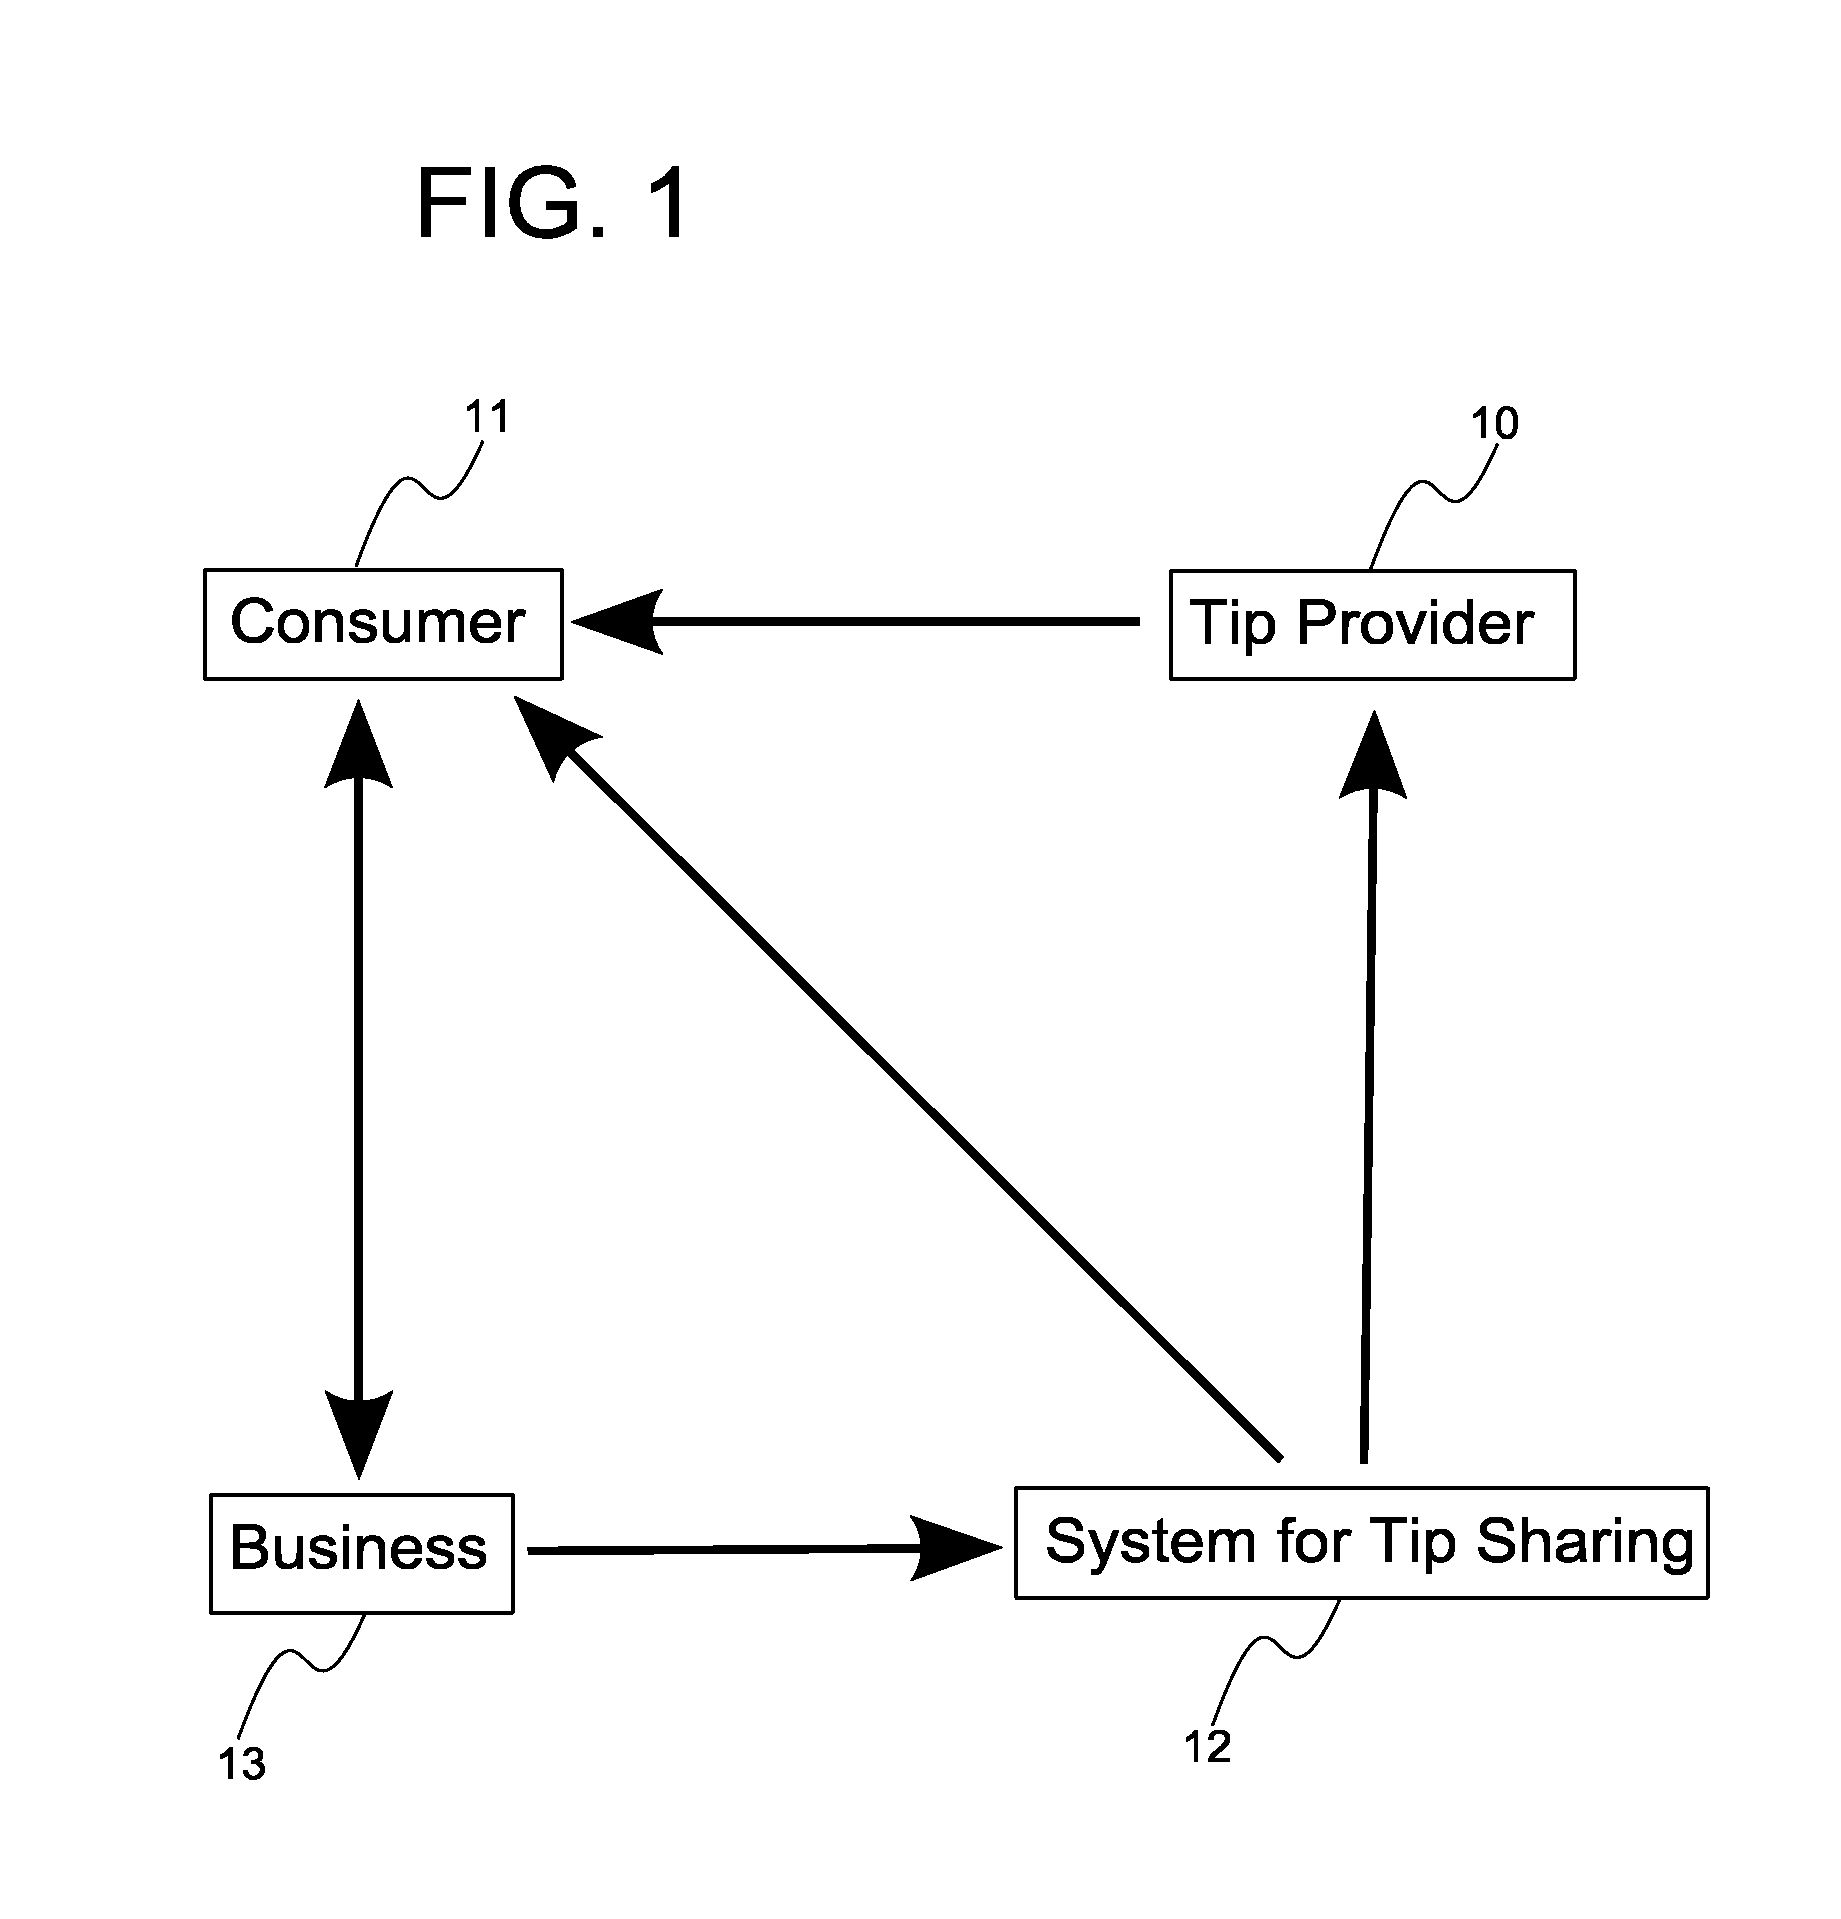 System, method, and computer program product for tip sharing using social networking